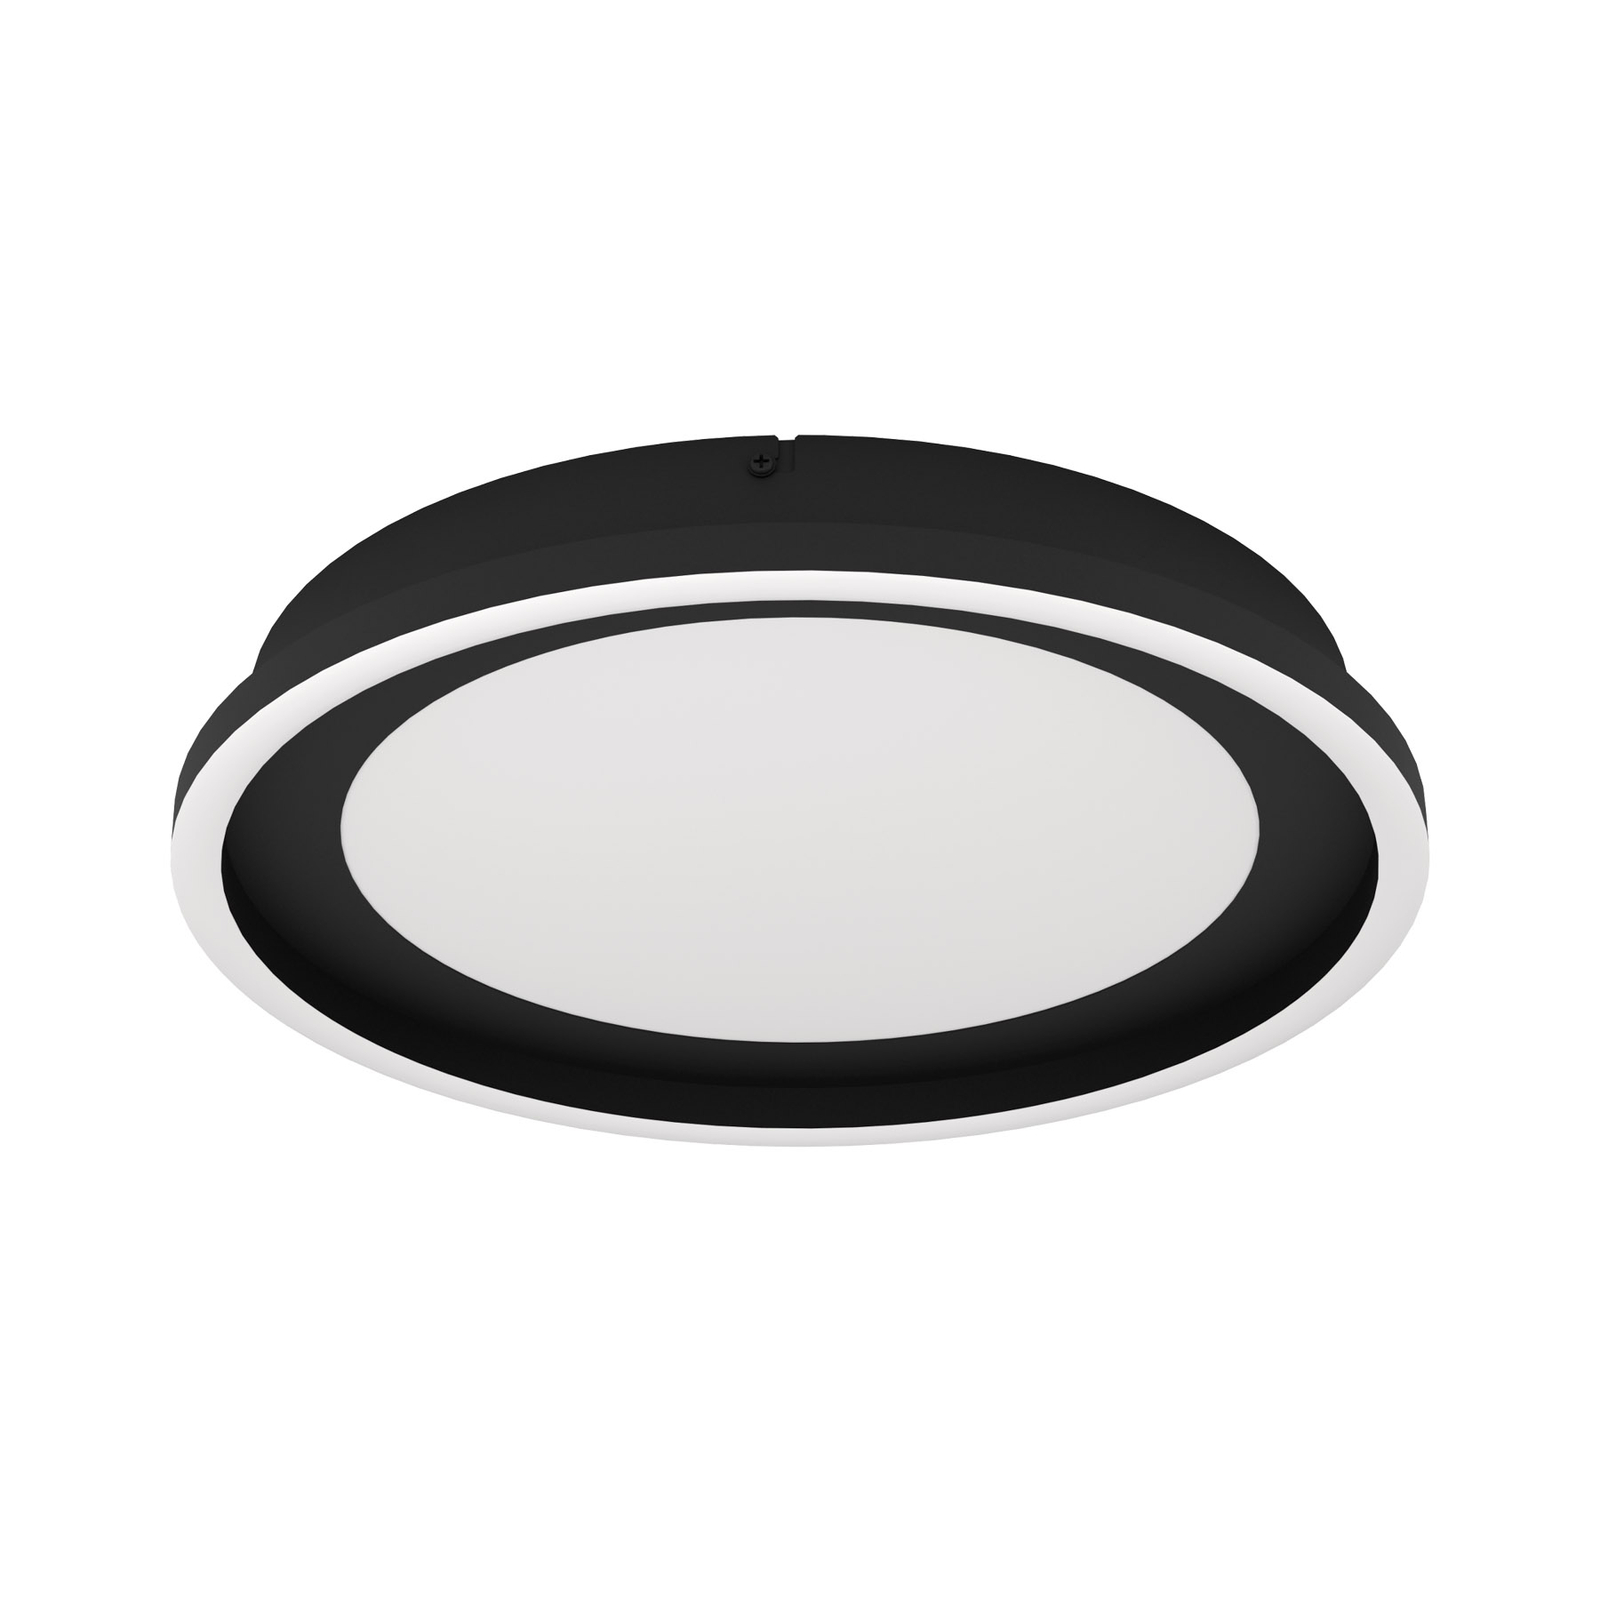 Calagrano LED ceiling lamp with remote control, Ø38cm